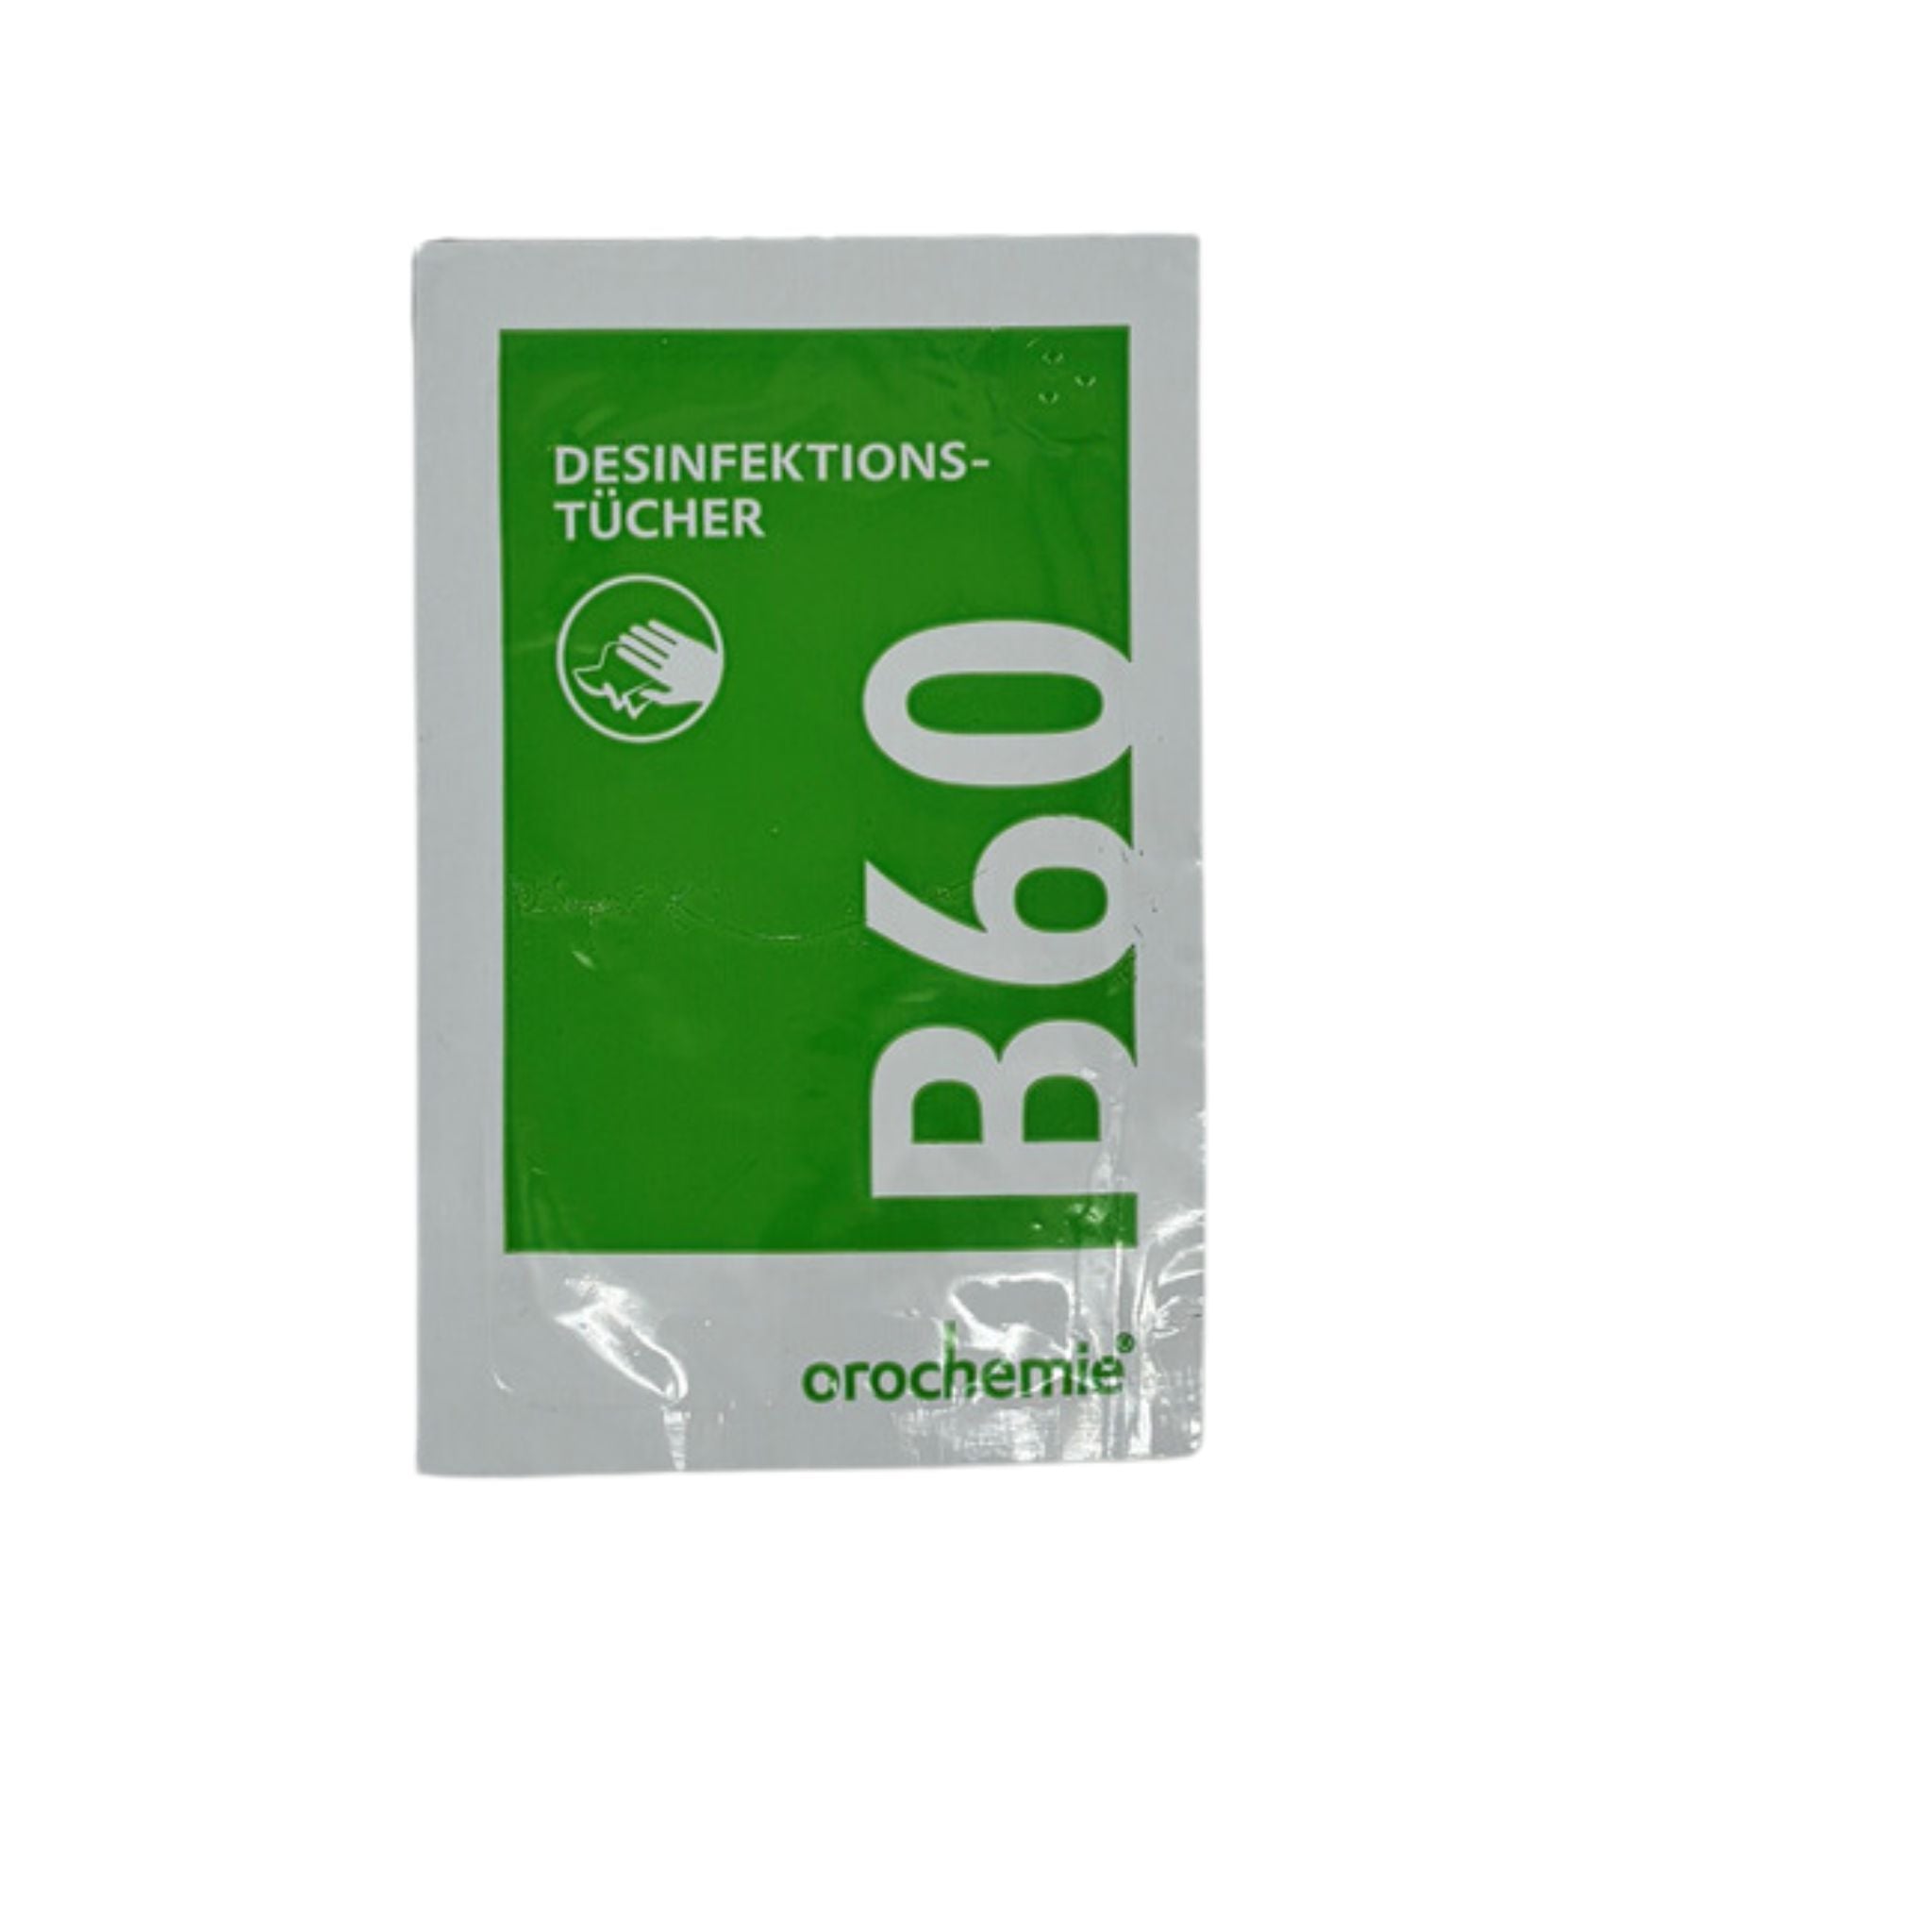 B60 wipes individually packed